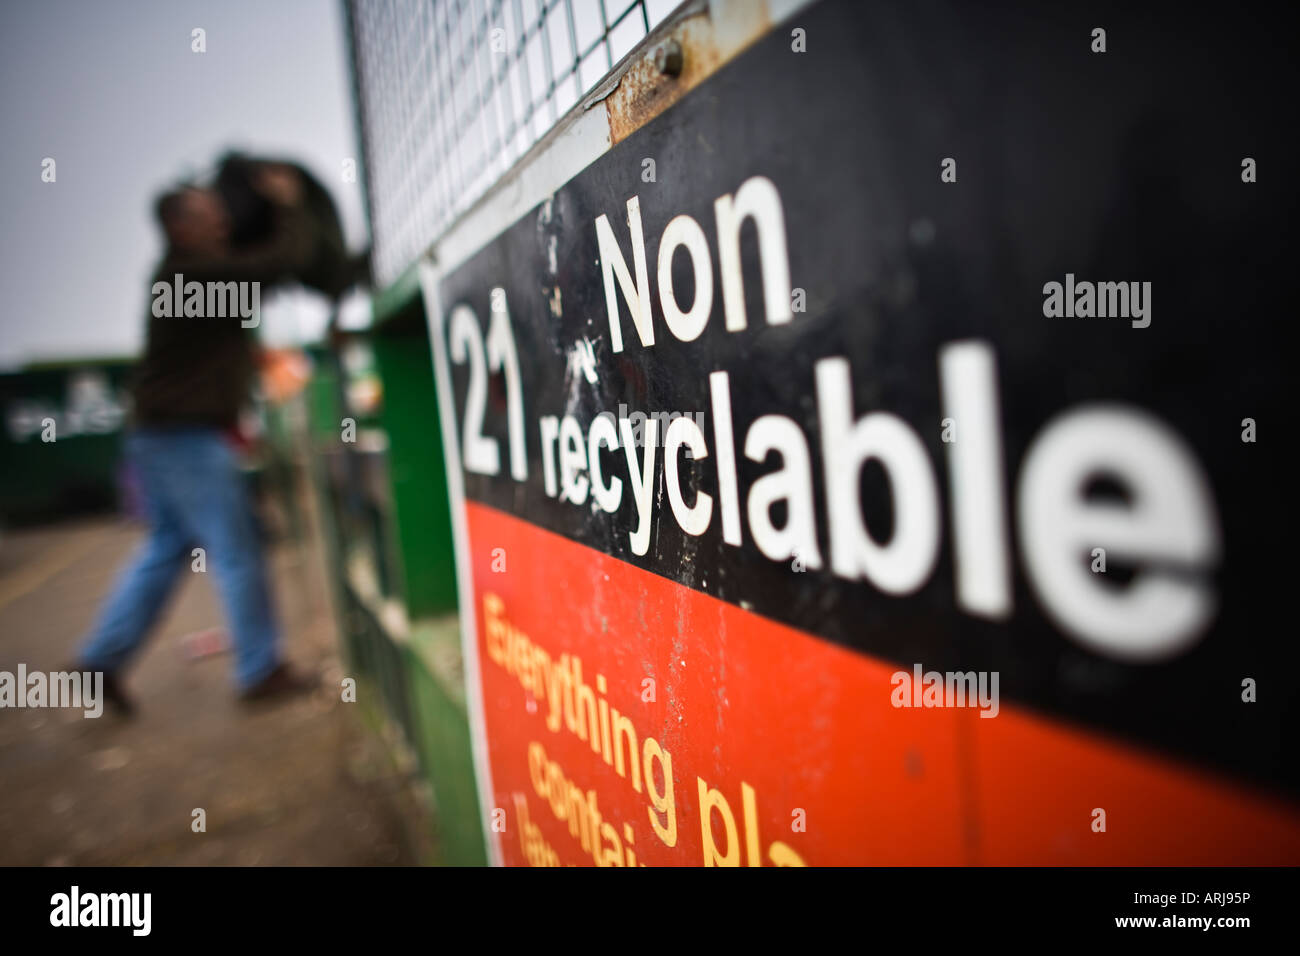 Non recyclable container at a recycling centre, UK Stock Photo